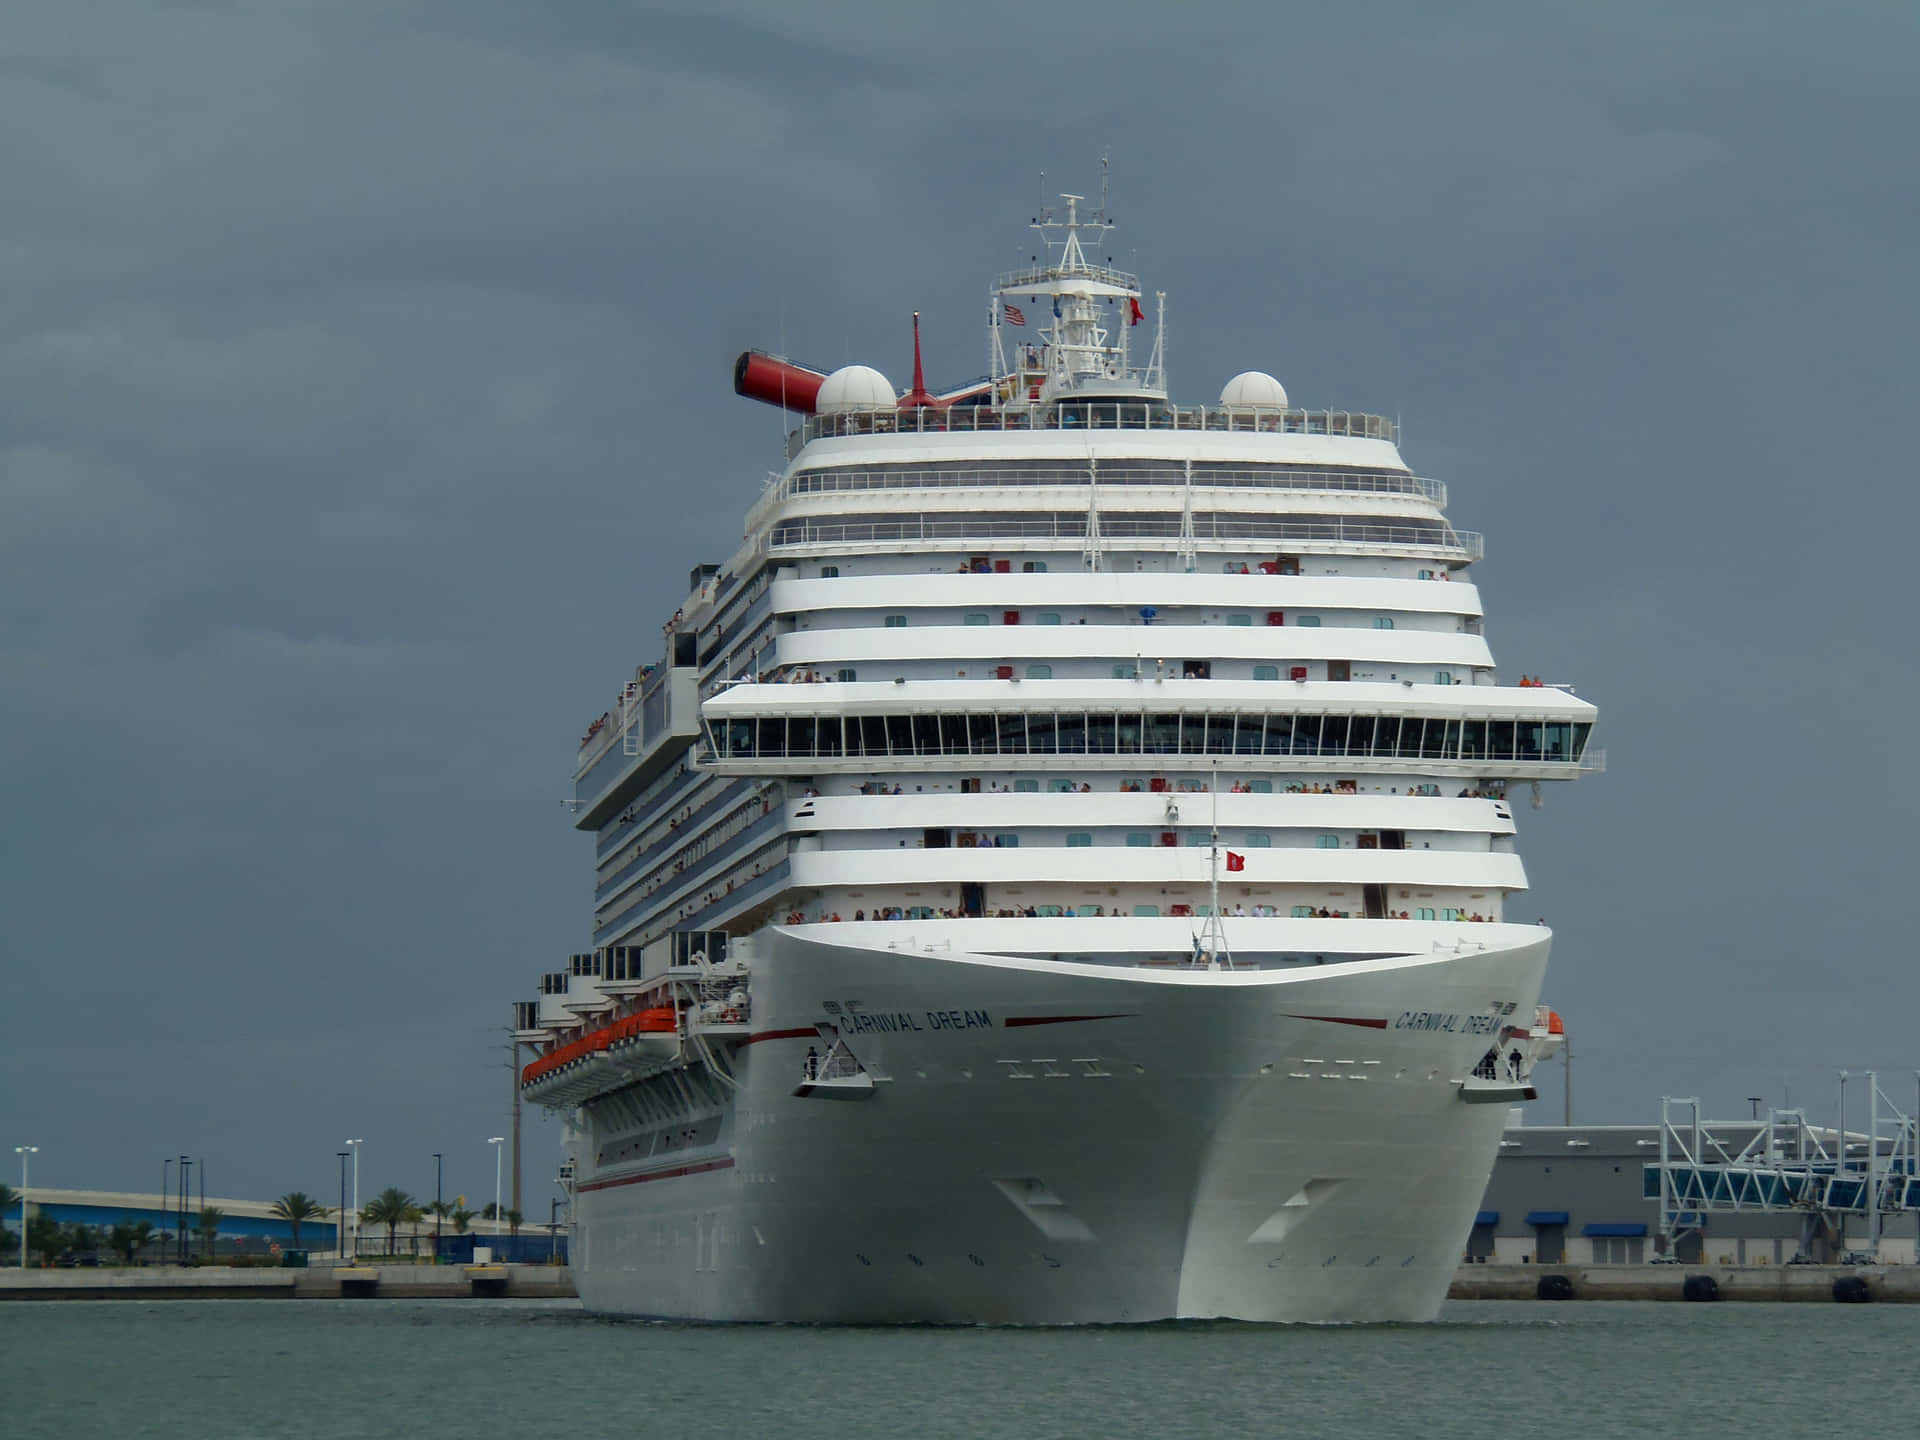 A Large Cruise Ship Is Docked In A Harbor